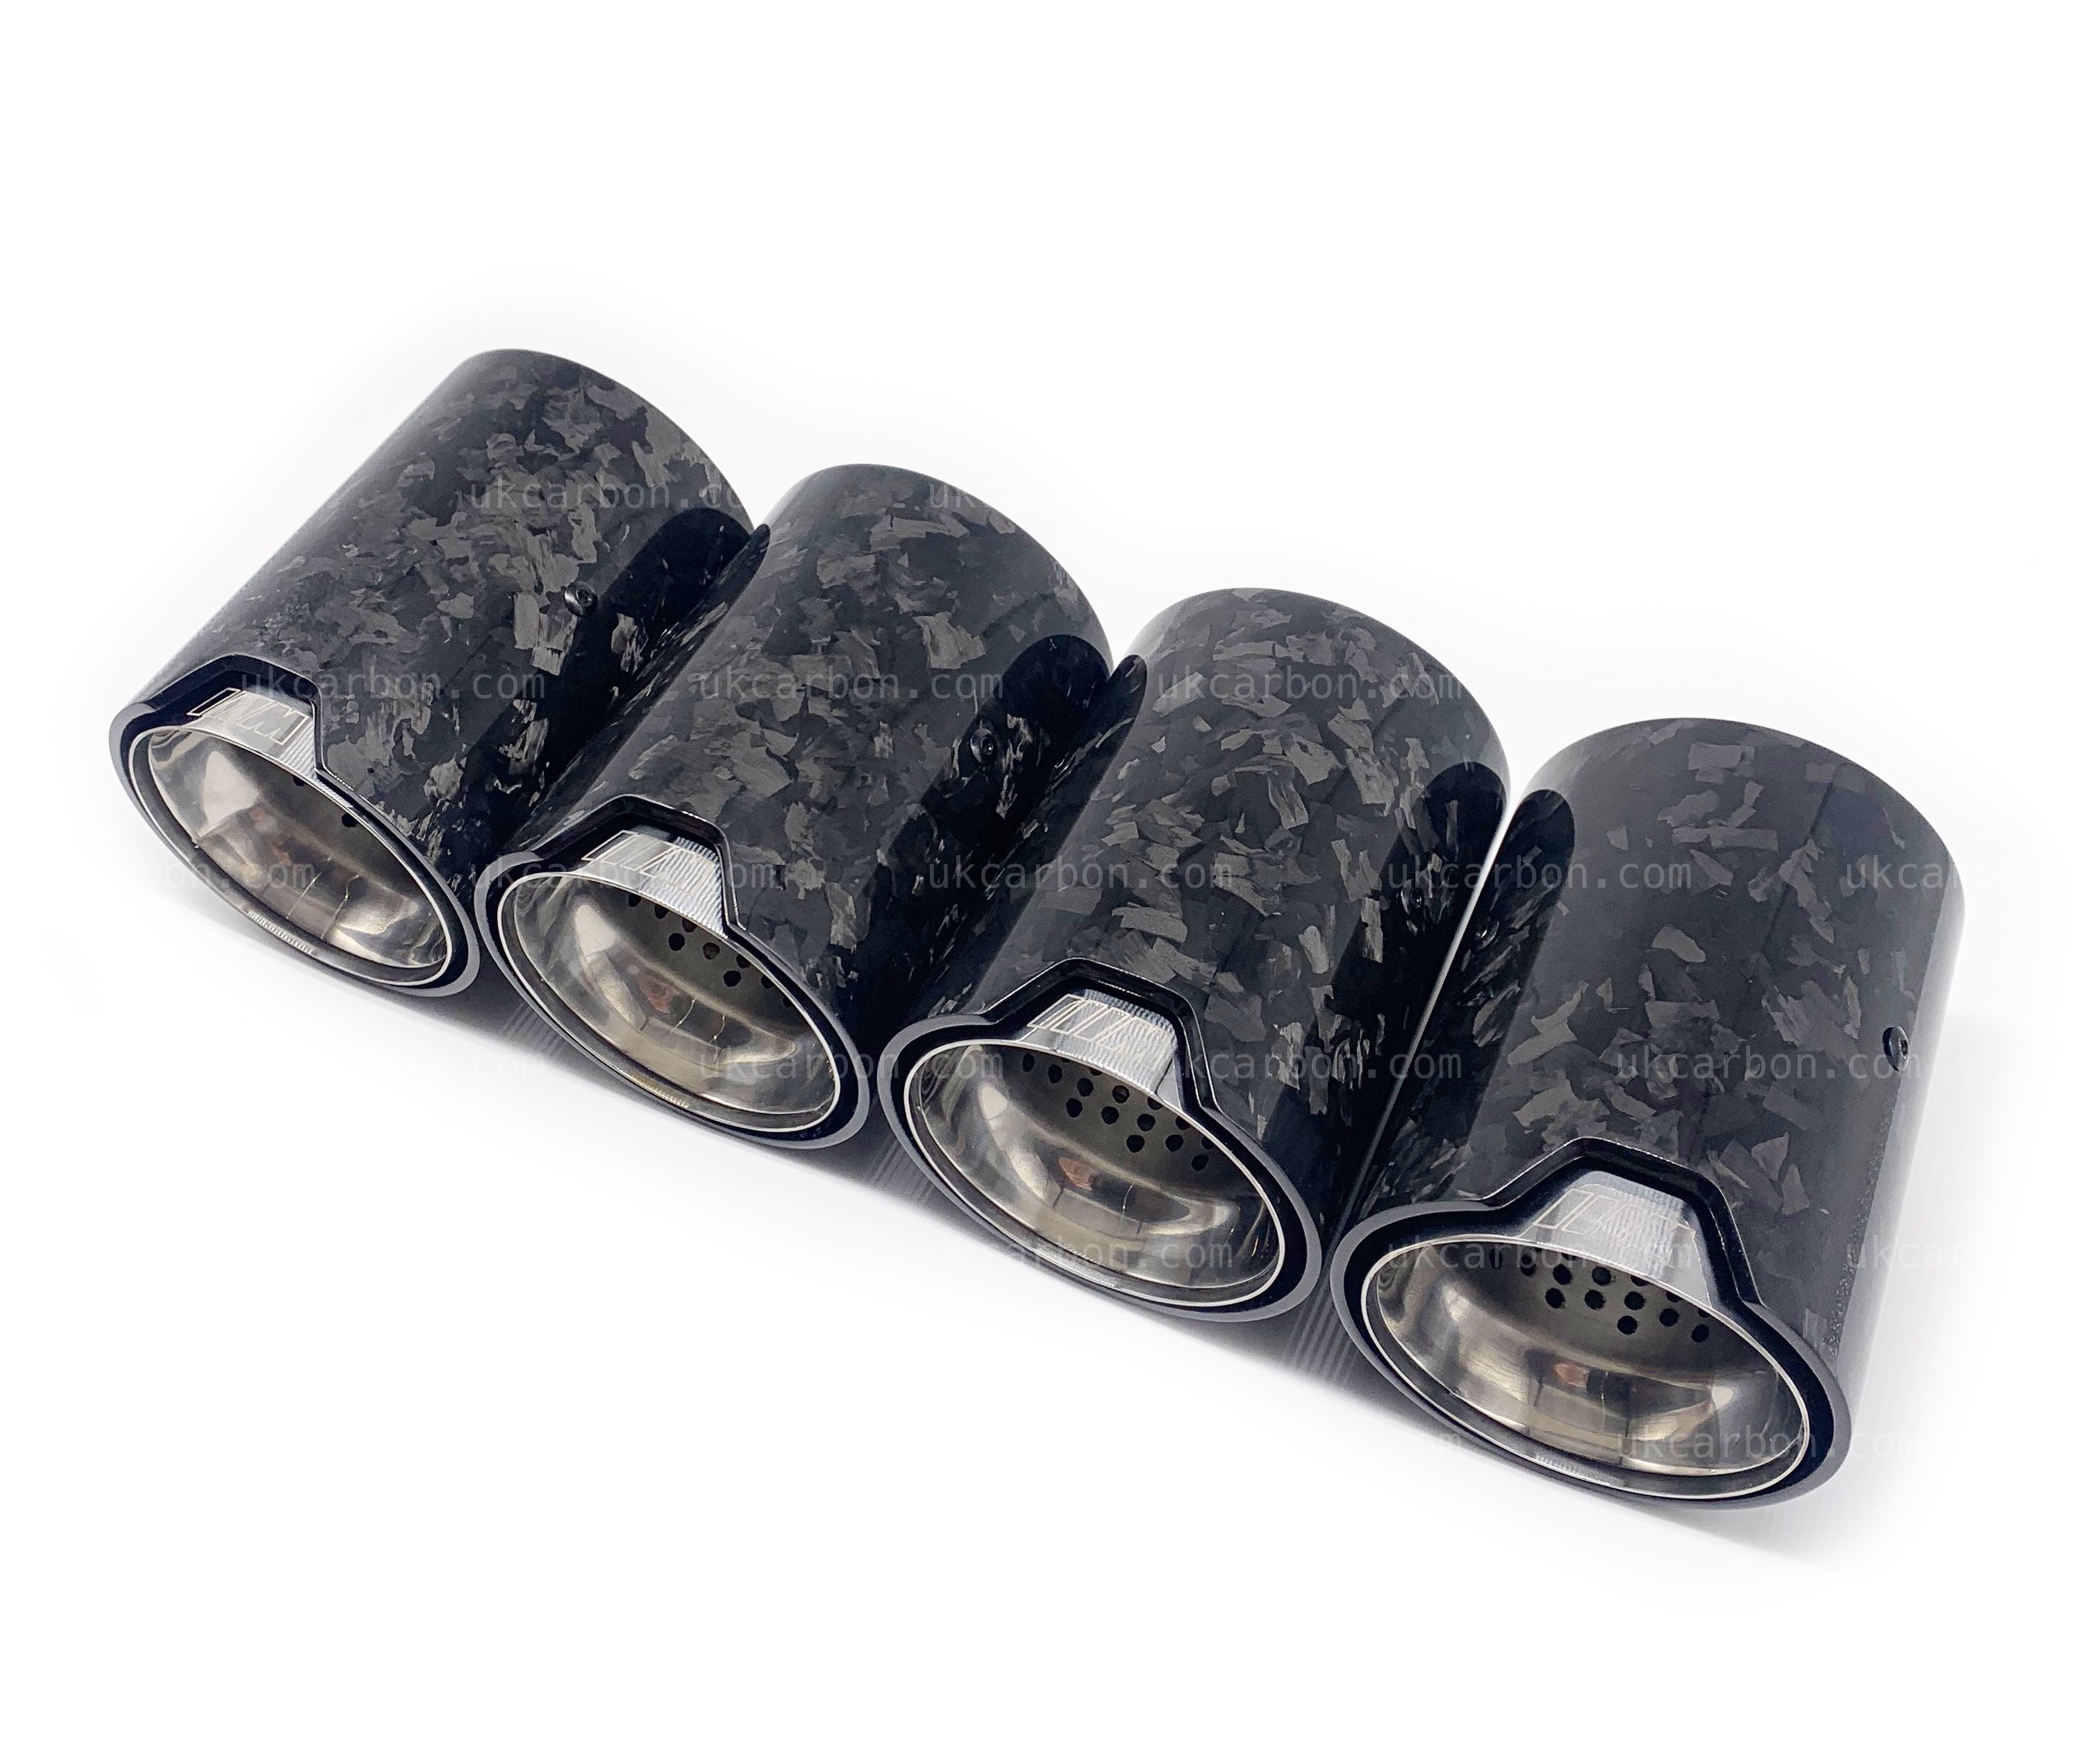 BMW M2 M3 M4 Exhaust Tips Silver Forged Carbon Fibre F87 F80 F82 F83 by UKCarbon